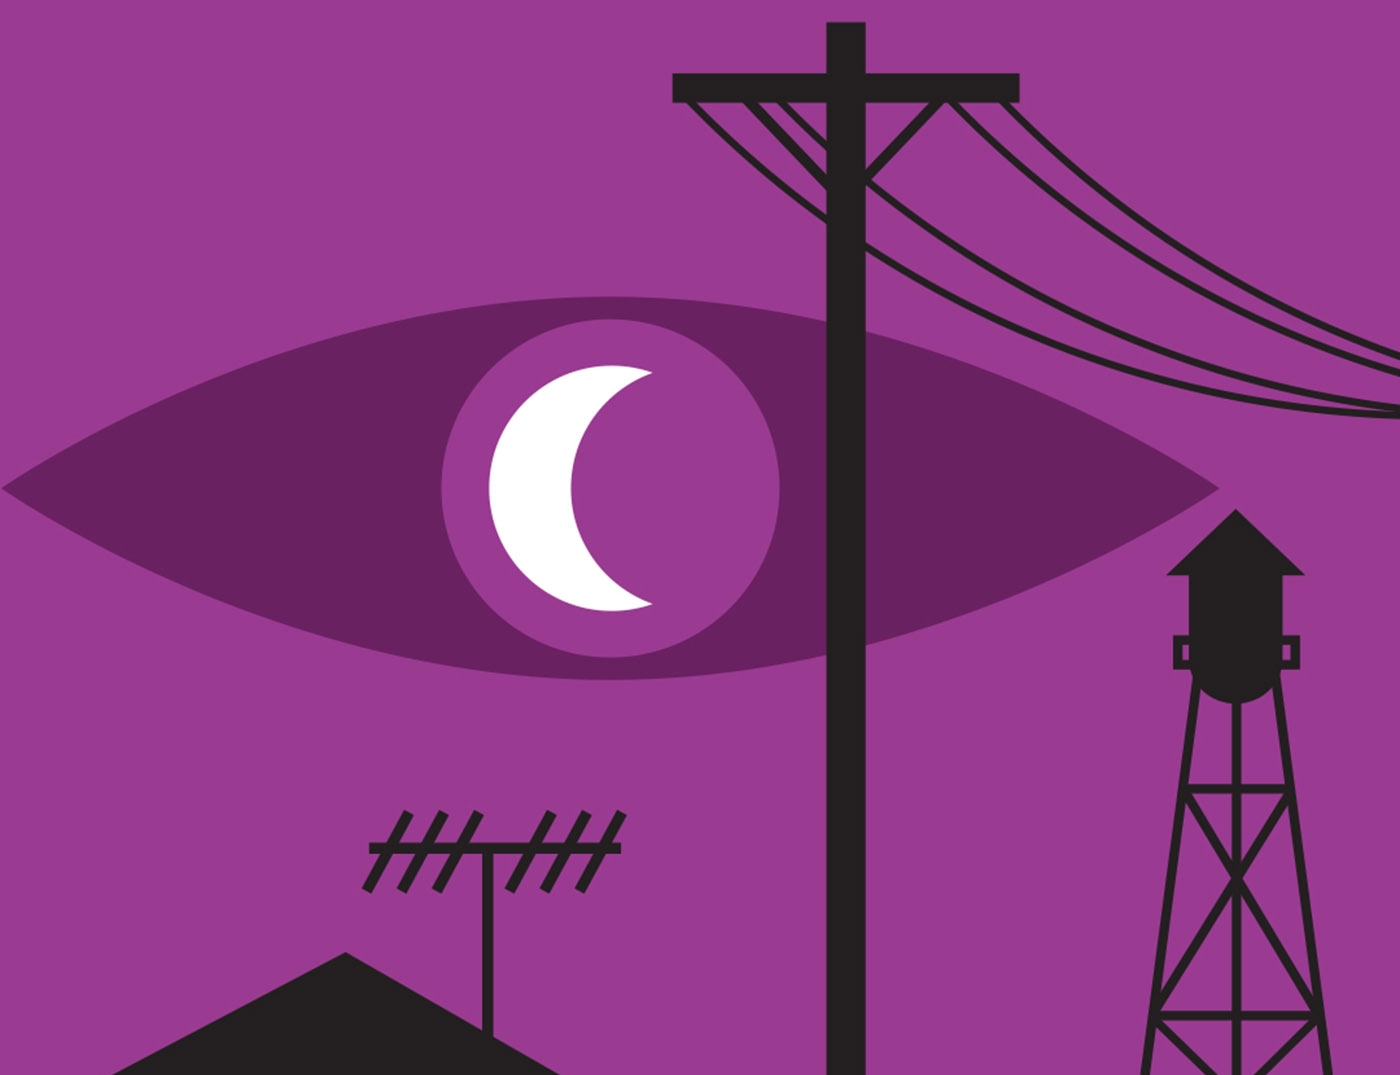 Geek insider, geekinsider, geekinsider. Com,, hello readers, welcome to nightvale , gaming